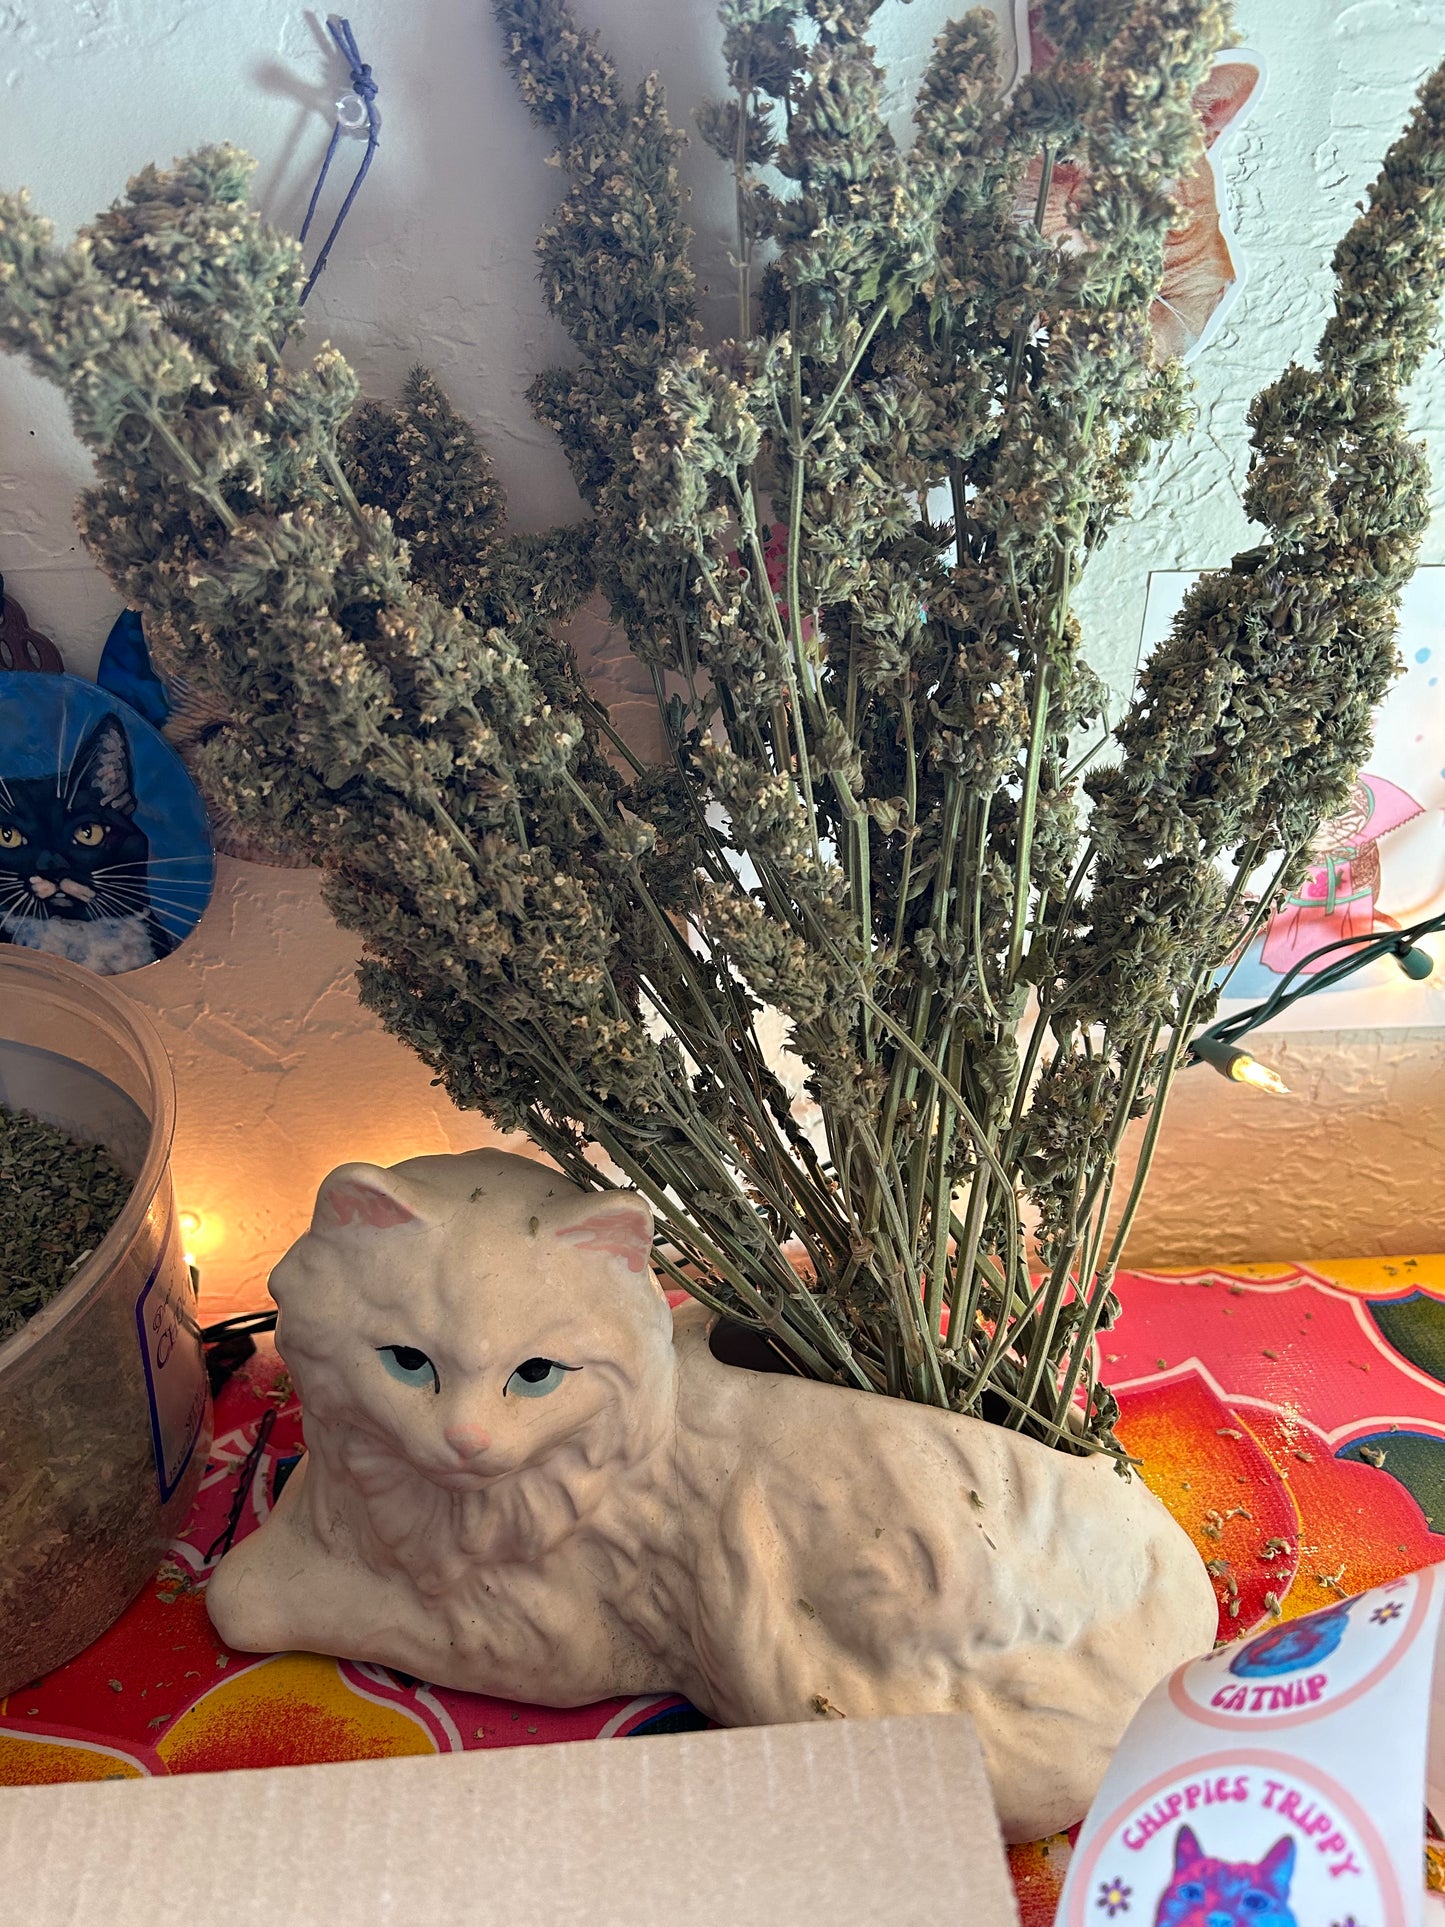 Limited edition bags of full catnip buds